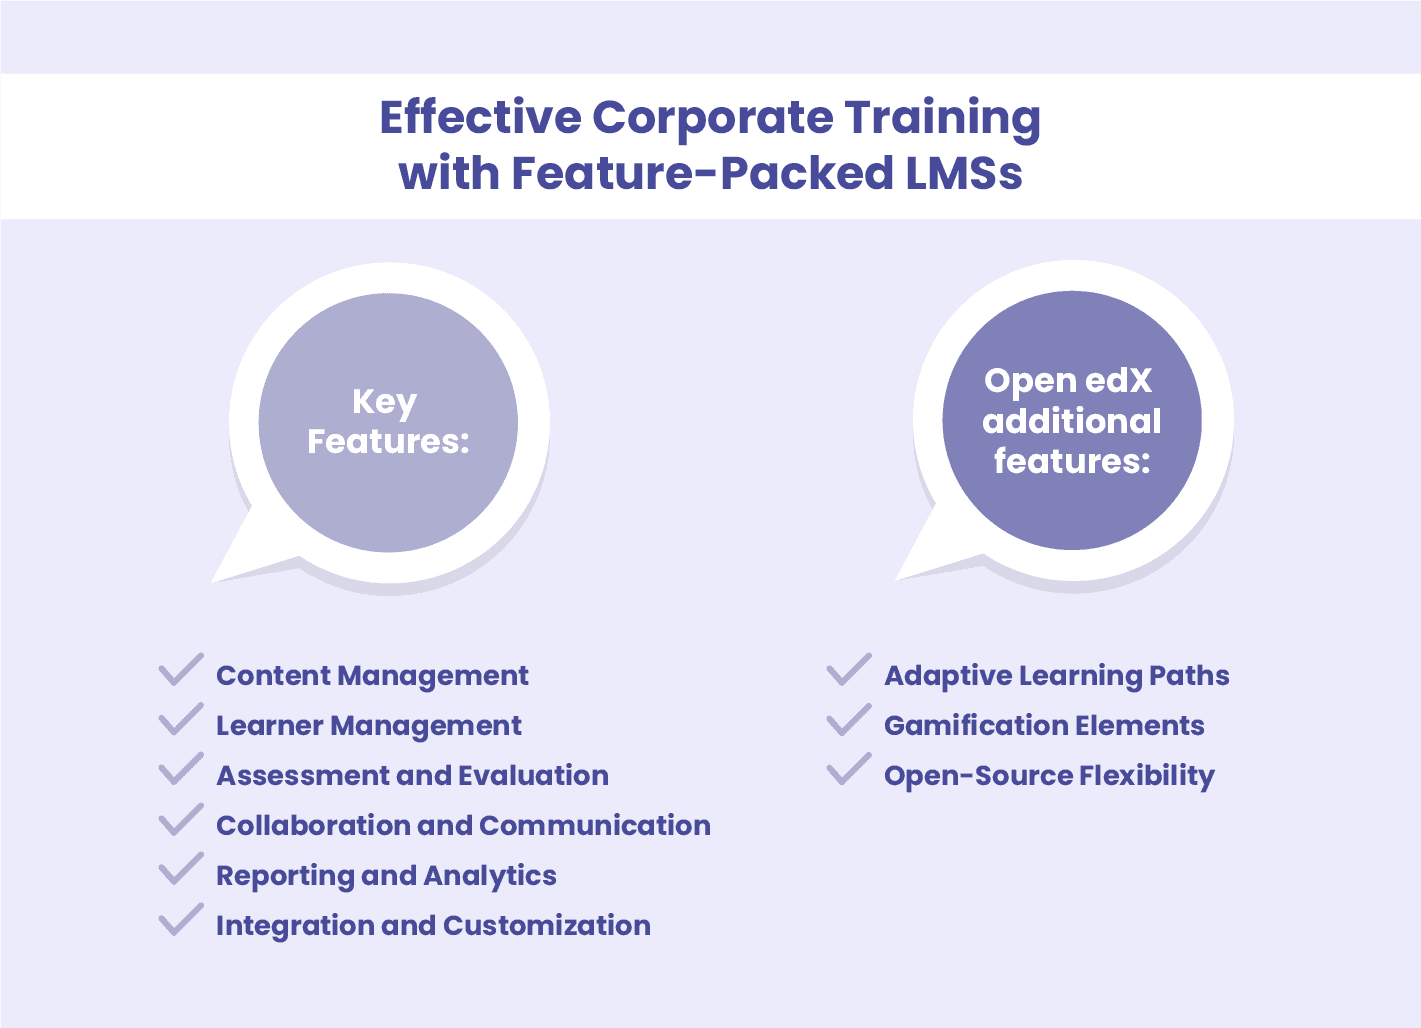 Key and additional features of the Corporate Training LMSs